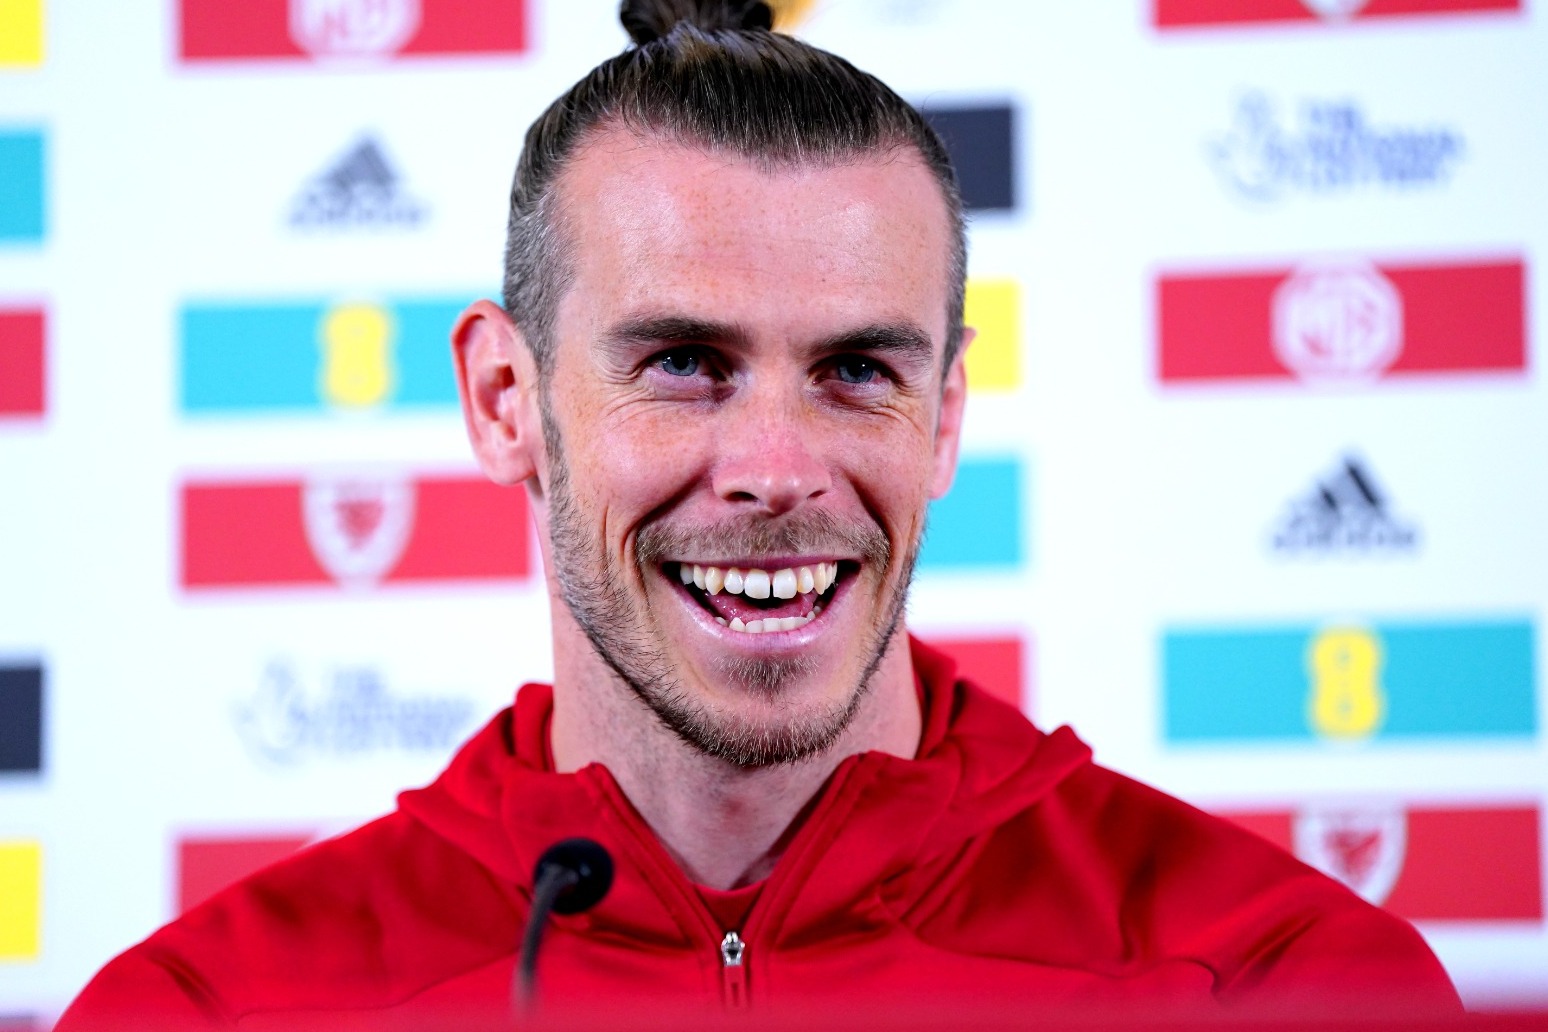 ‘Crazy’ calendar increases the risk of player burnout, says Gareth Bale 